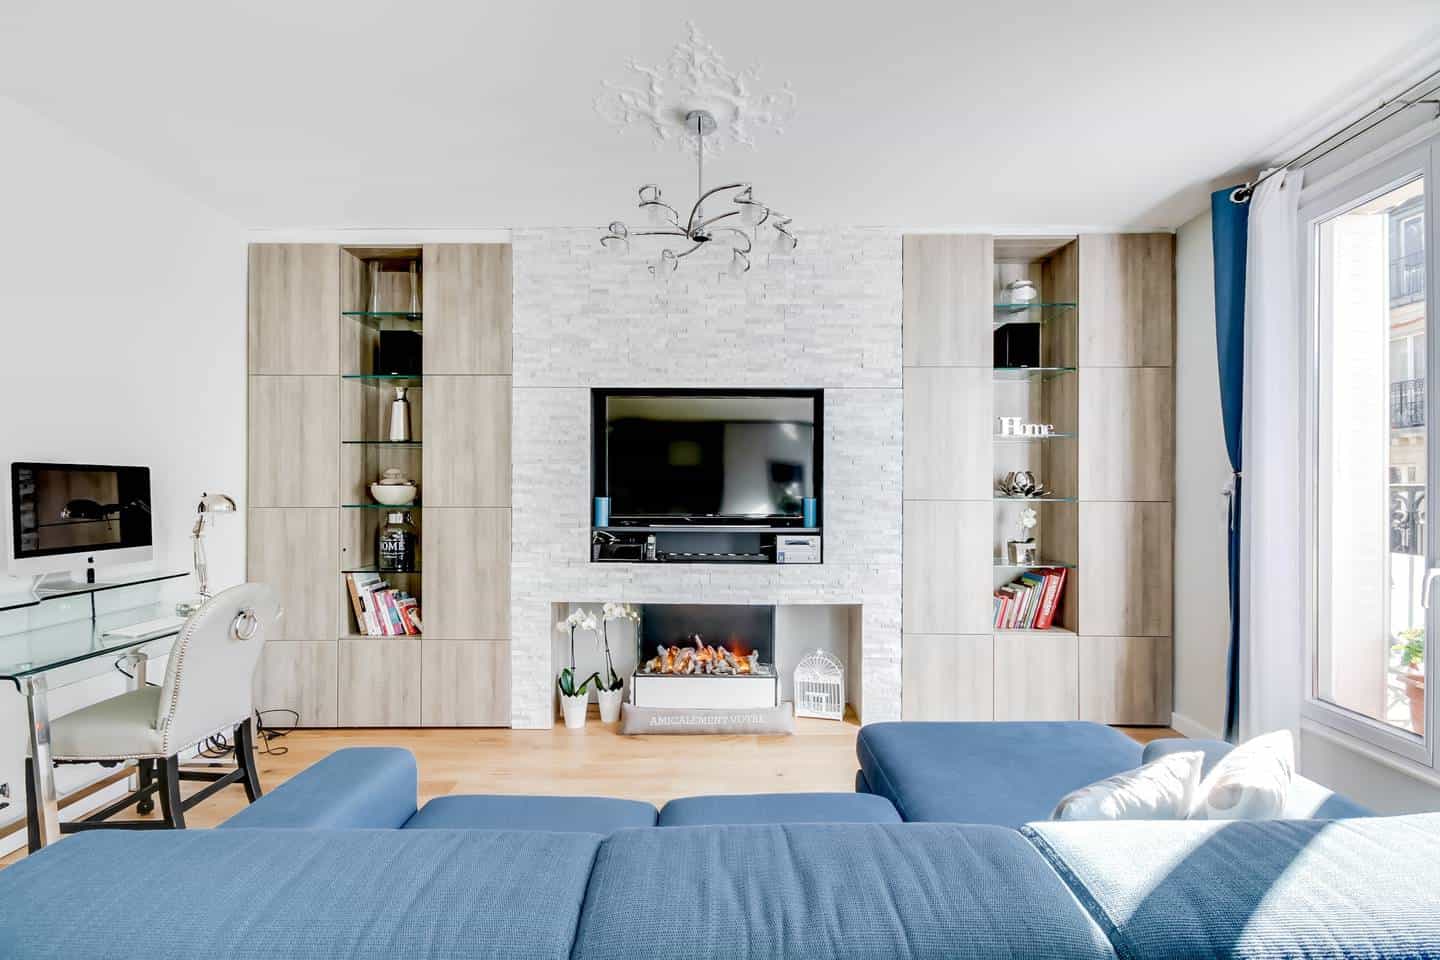 Wow! This Airbnb Paris listing near Arc De Triomphe is dreamy. You have to see the pictures!